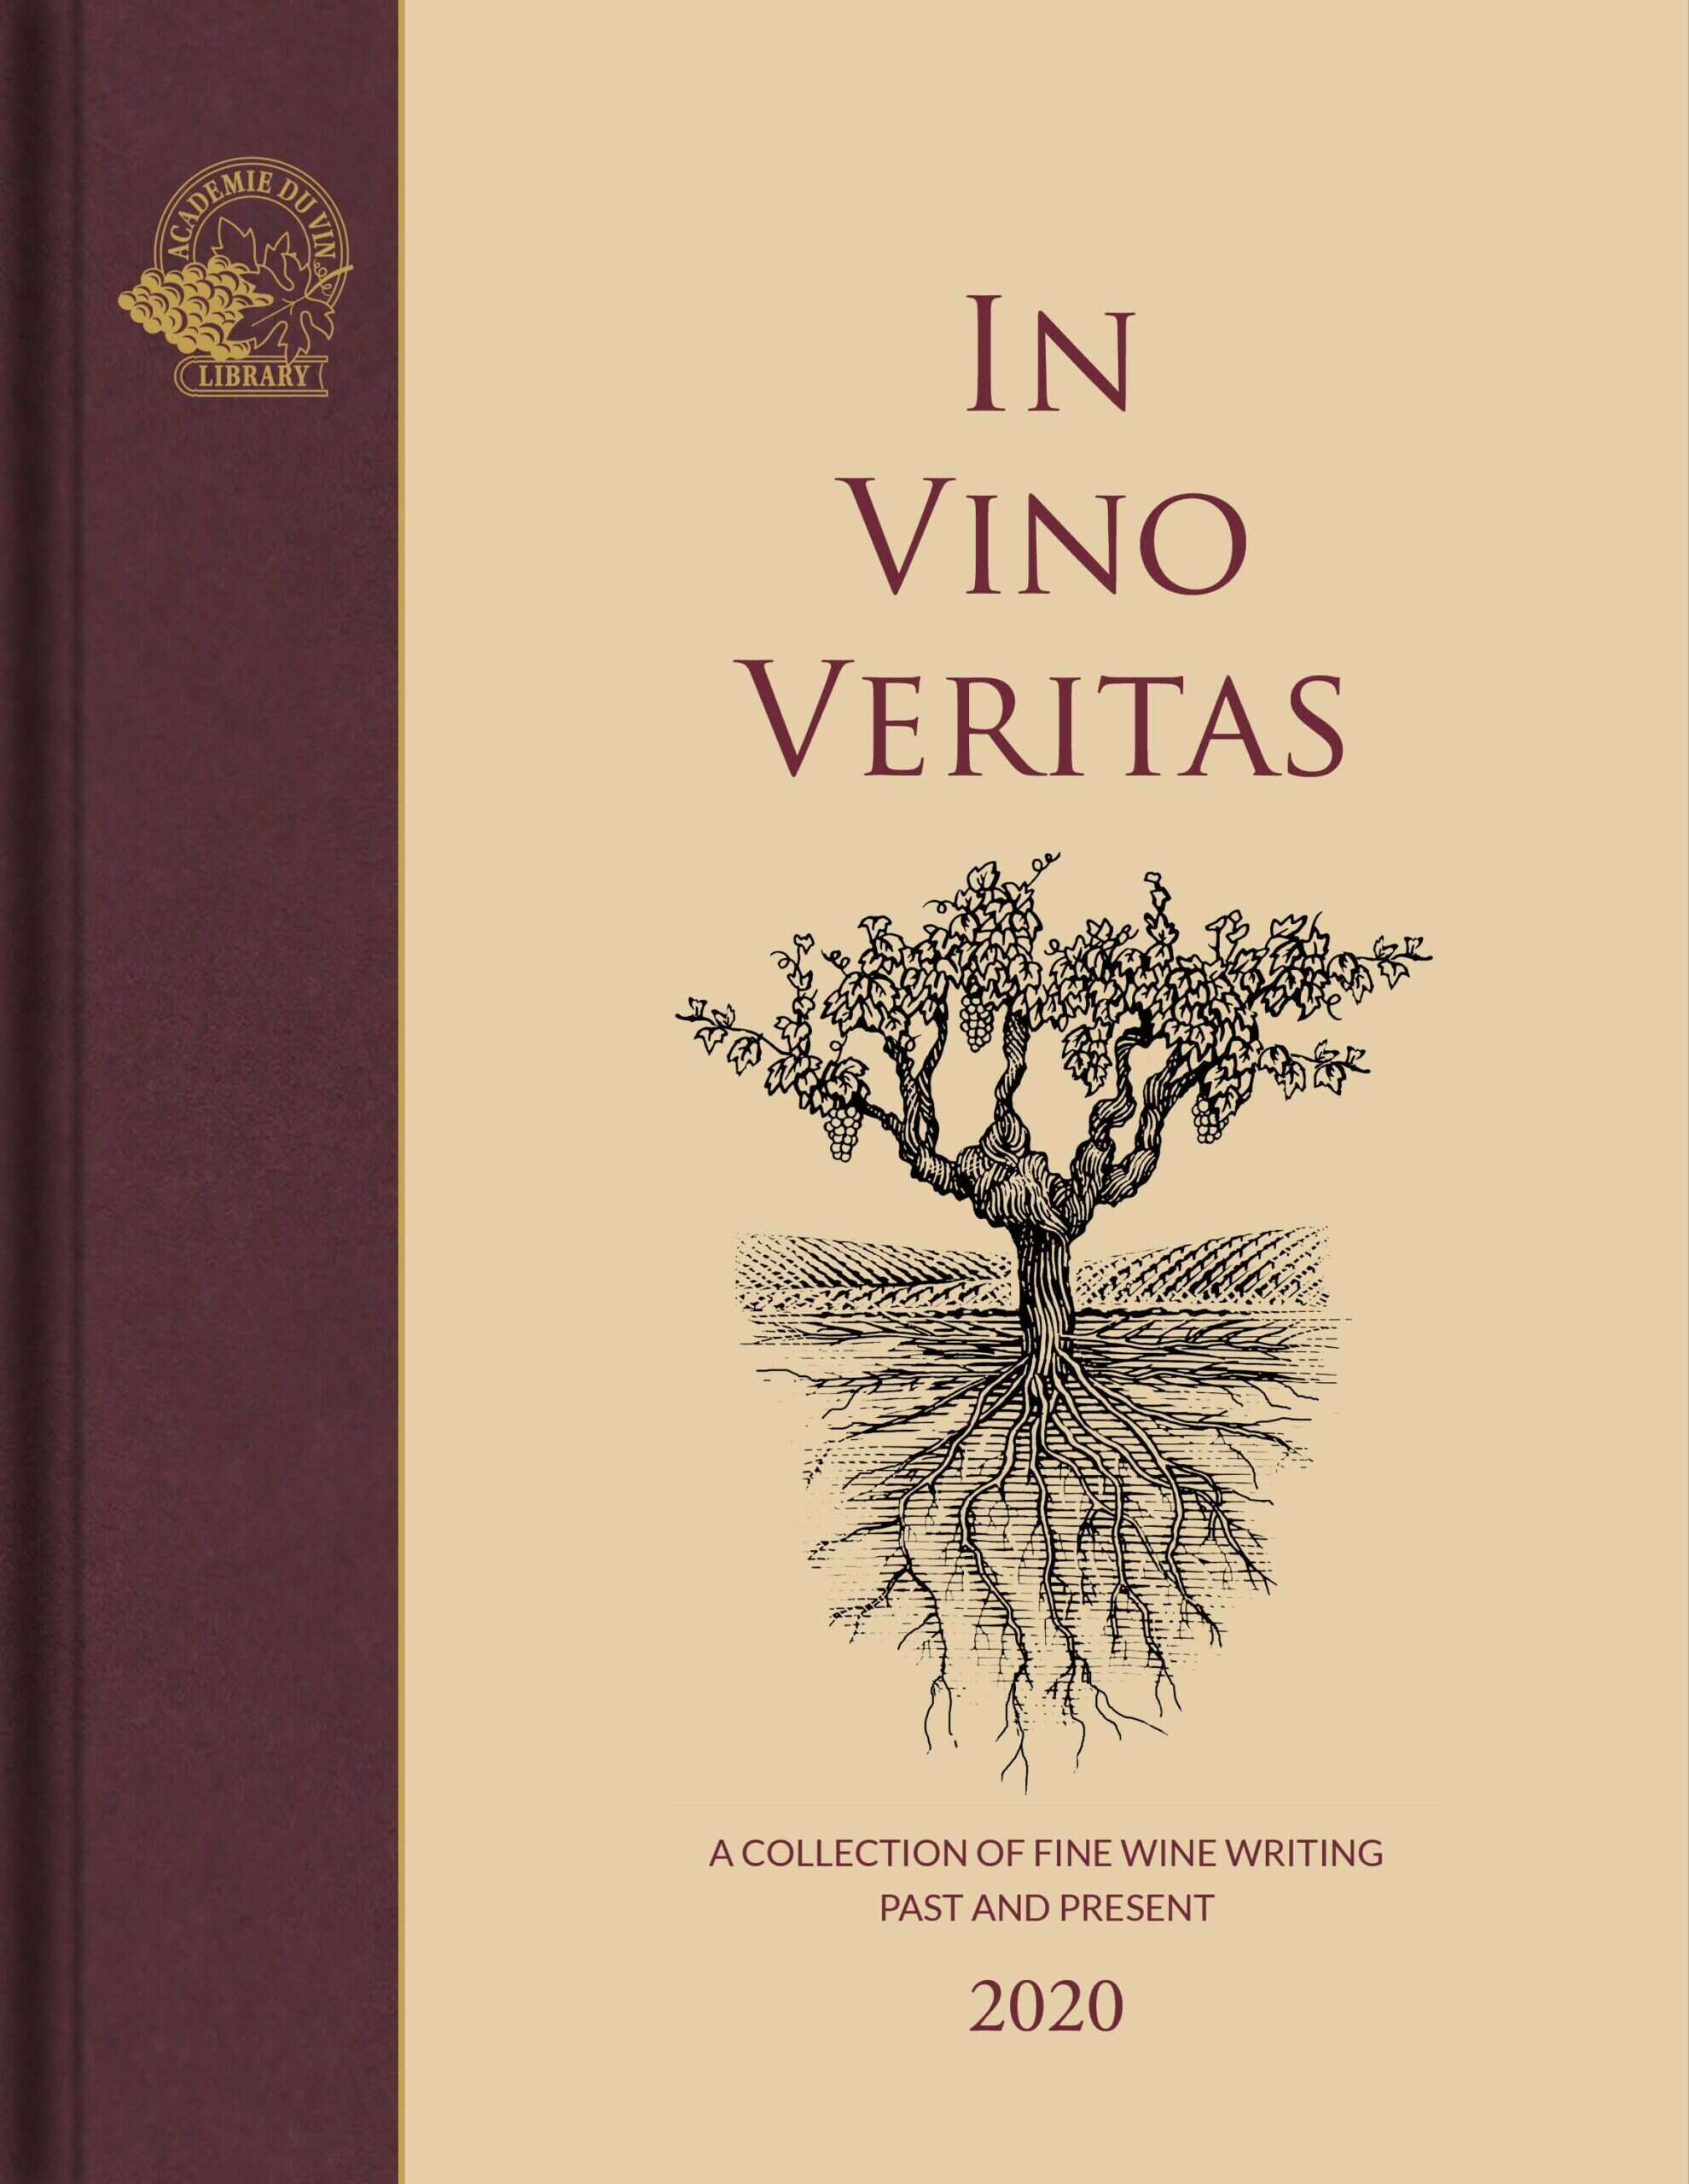 Book Review: In Vino Veritas 2020: A Collection of Fine Wine Writing Past and Present edited by Susan Keevil